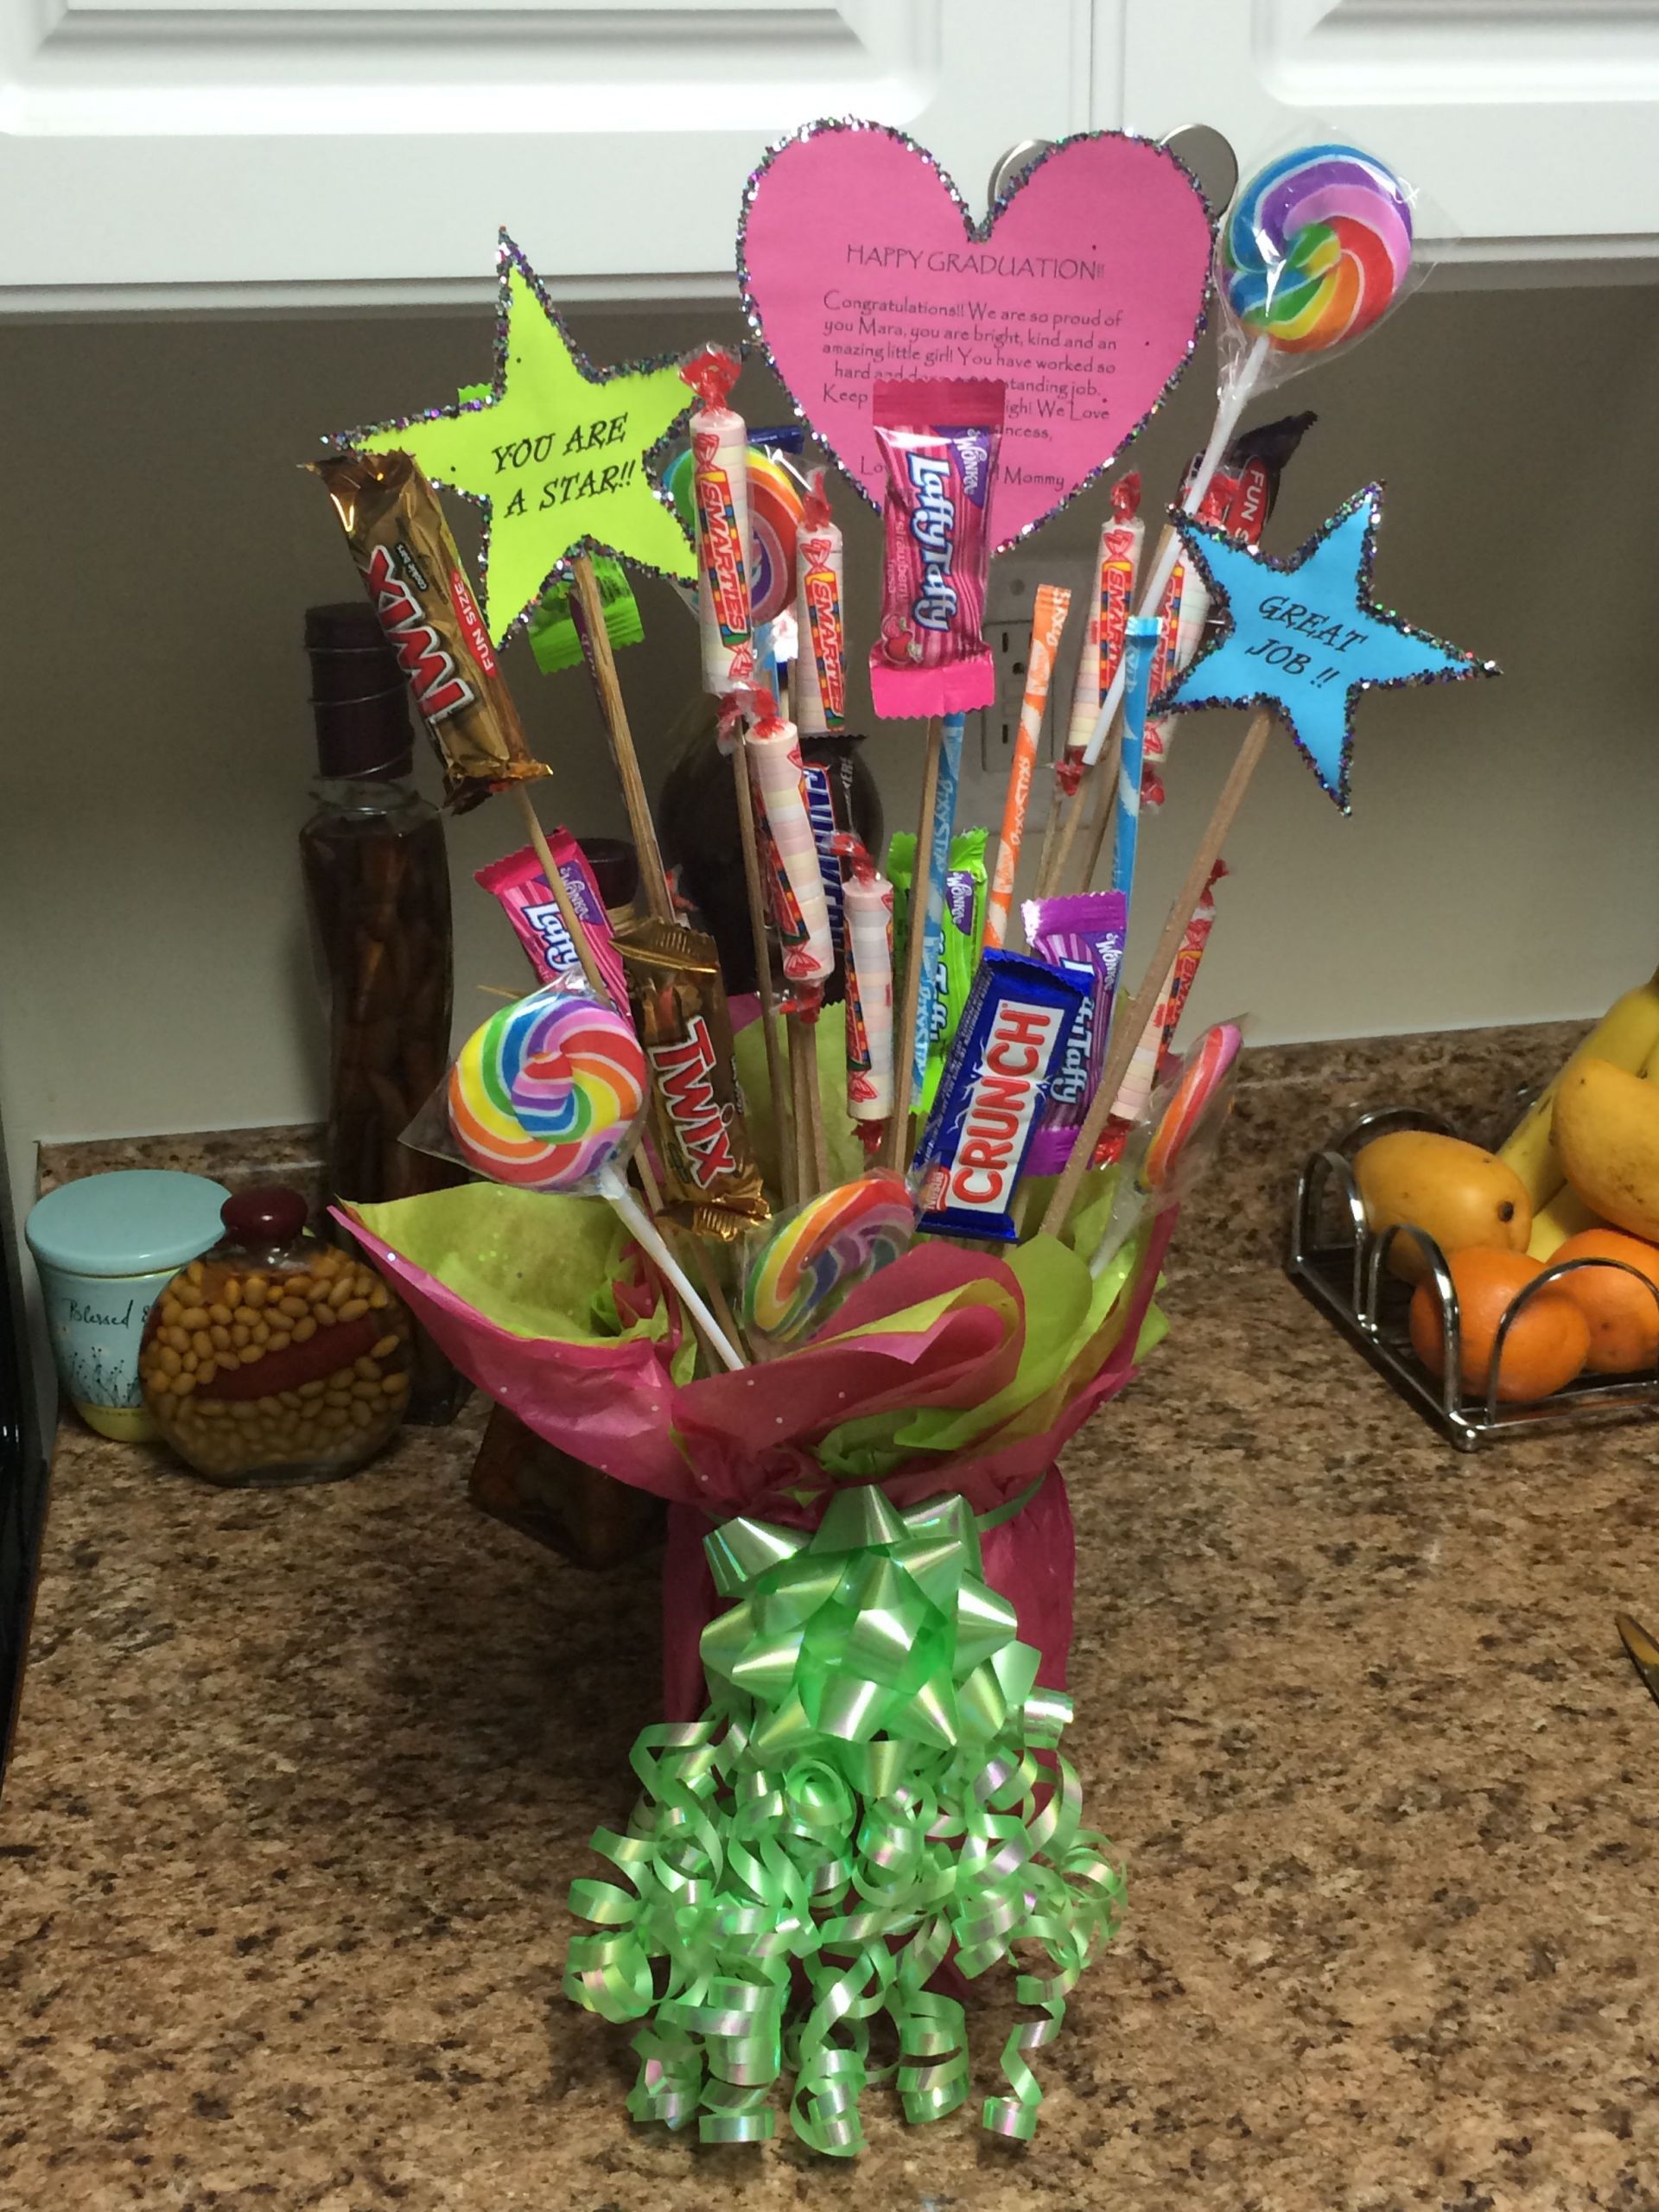 Elementary Graduation Gift Ideas
 This is a t bouquet I made for my daughter s 5th grade